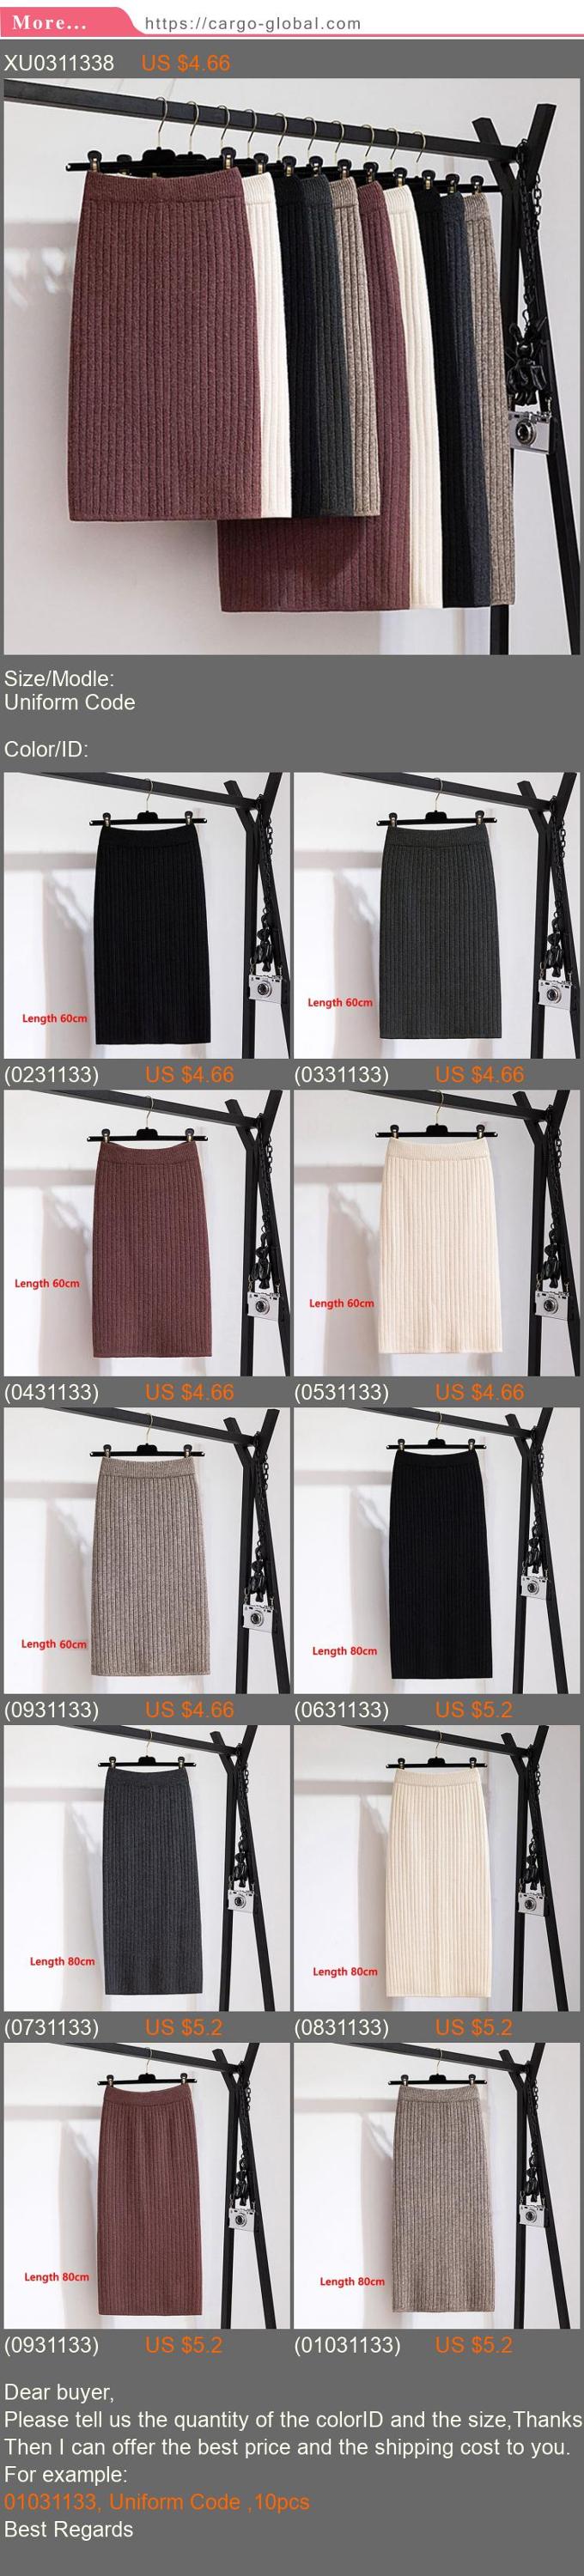 60-80CM Elastic Band Women Skirts Autumn Winter Warm Knitted Straight Skirt Ribbed Ribbed Mid-Long Skirt